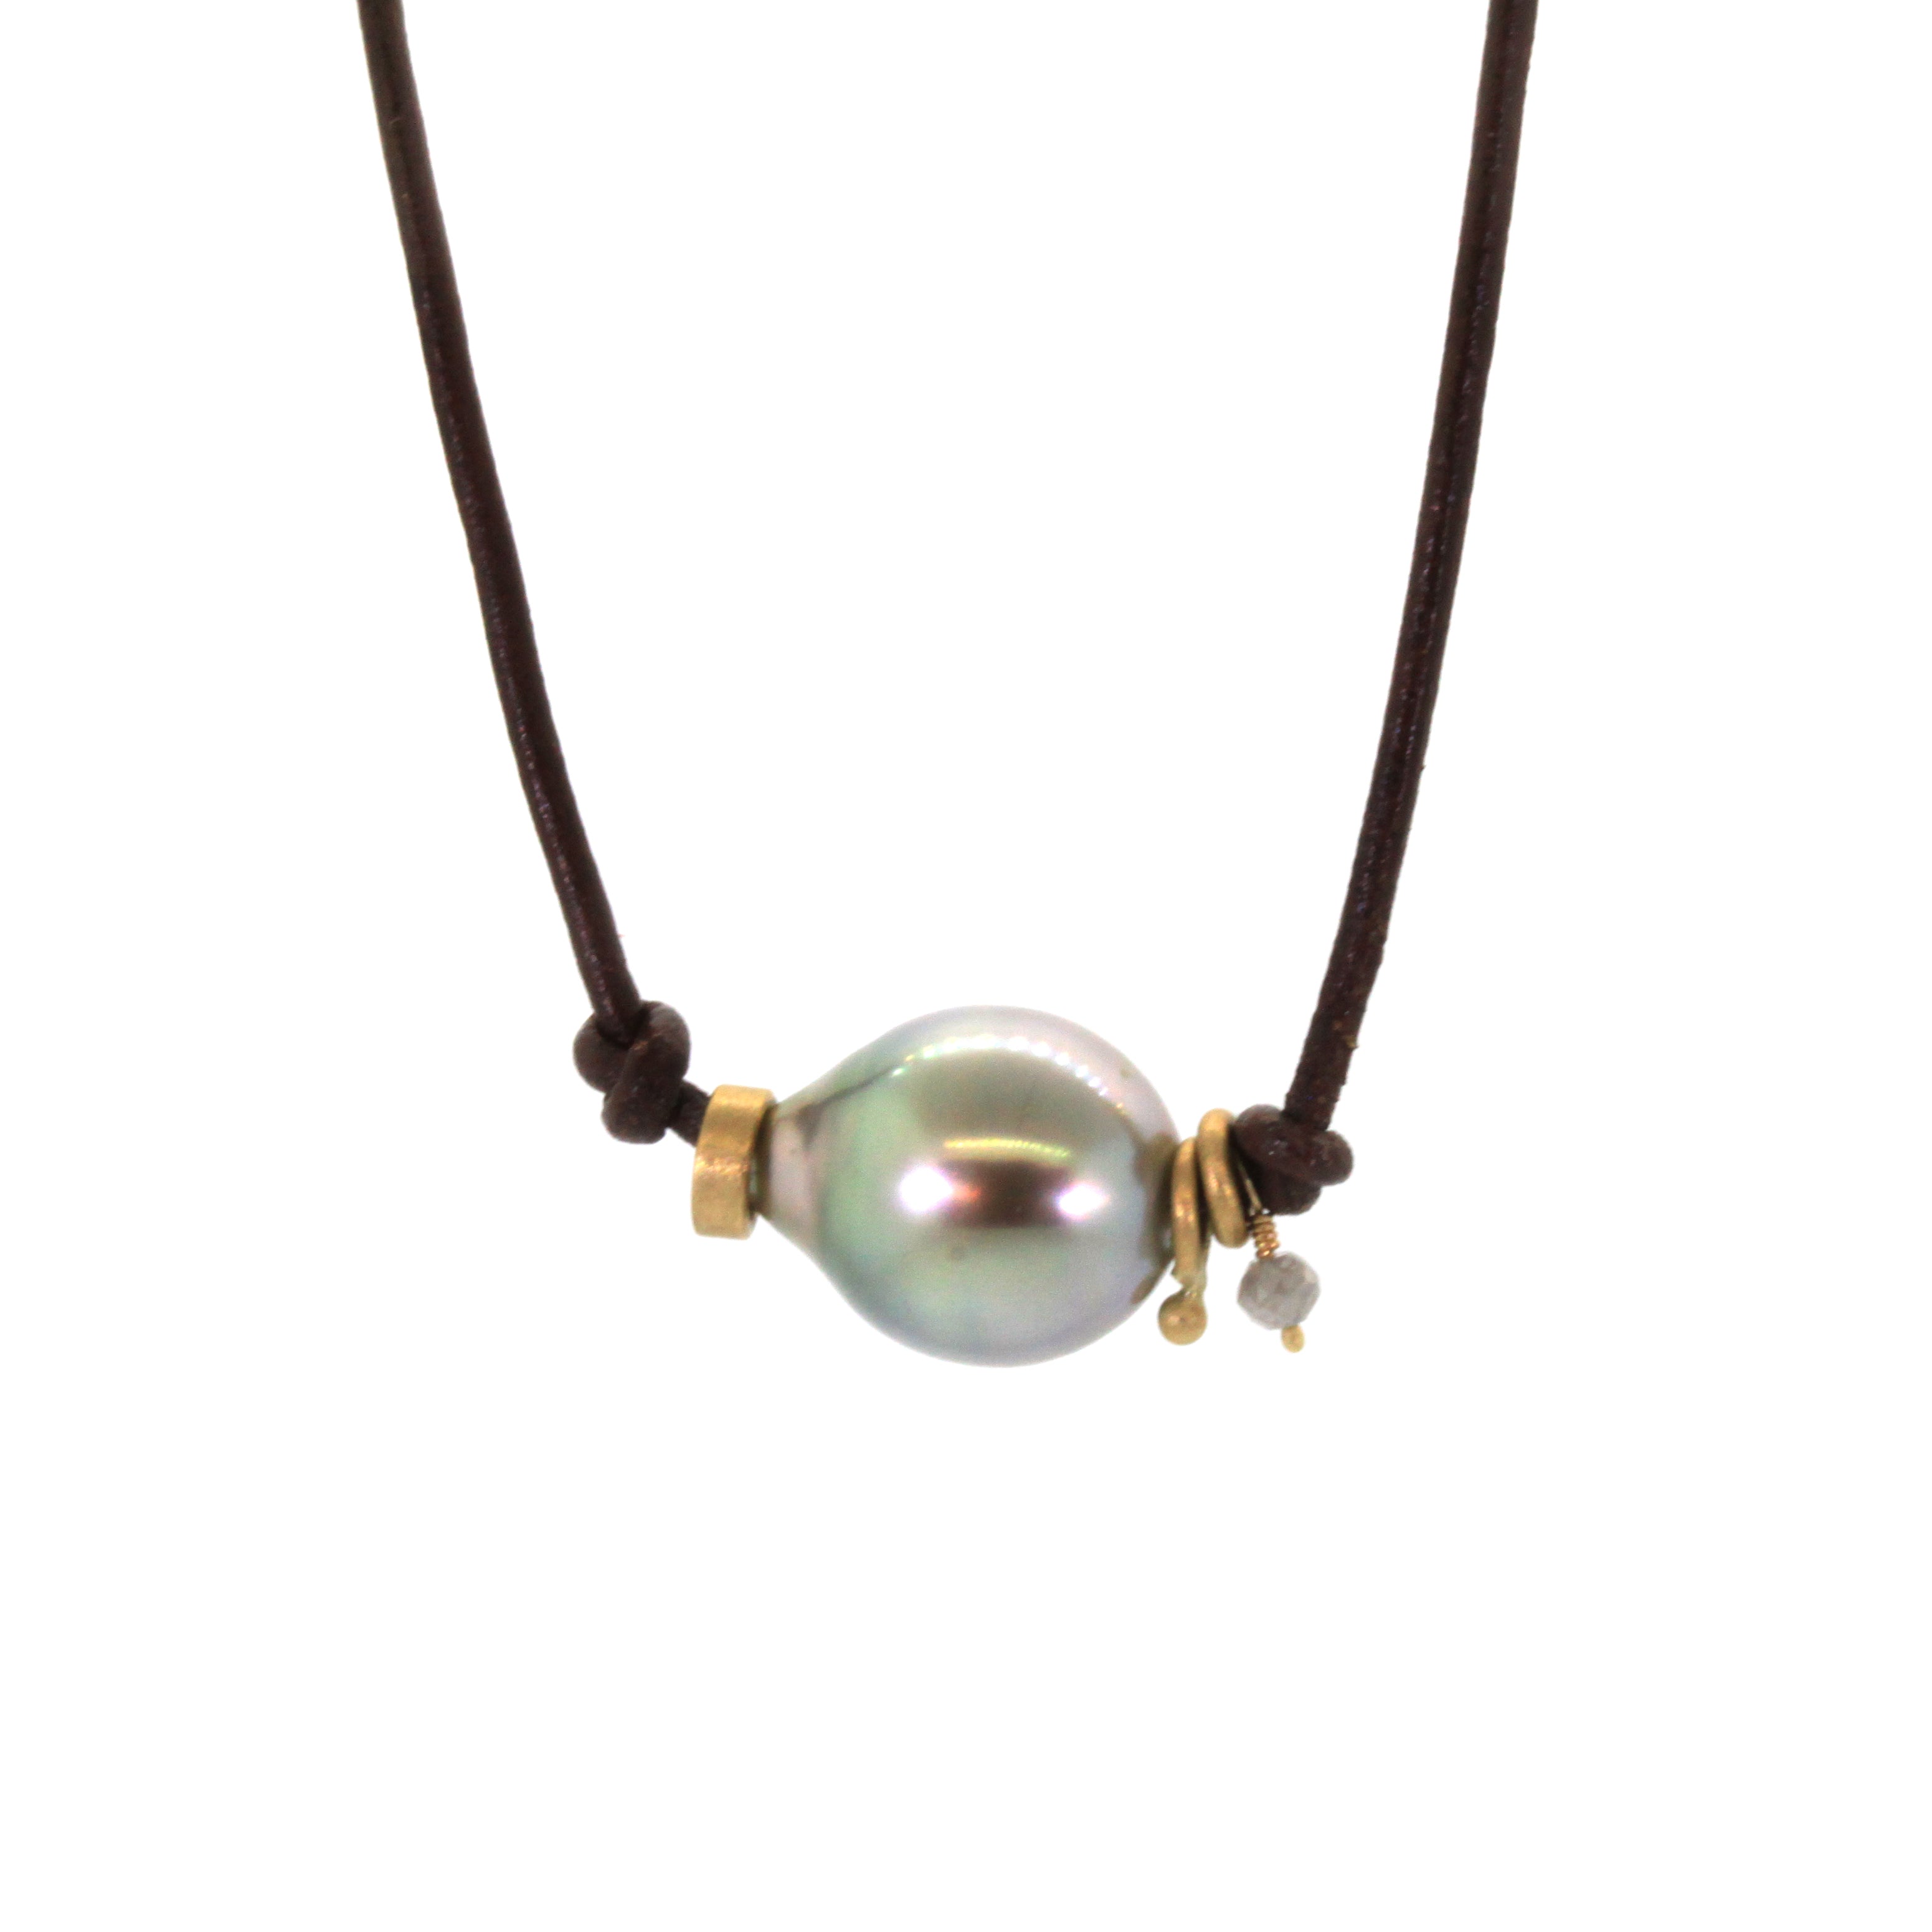 Grey pearl and leather necklace handcrafted by Houston jeweler, Rebecca Lankford